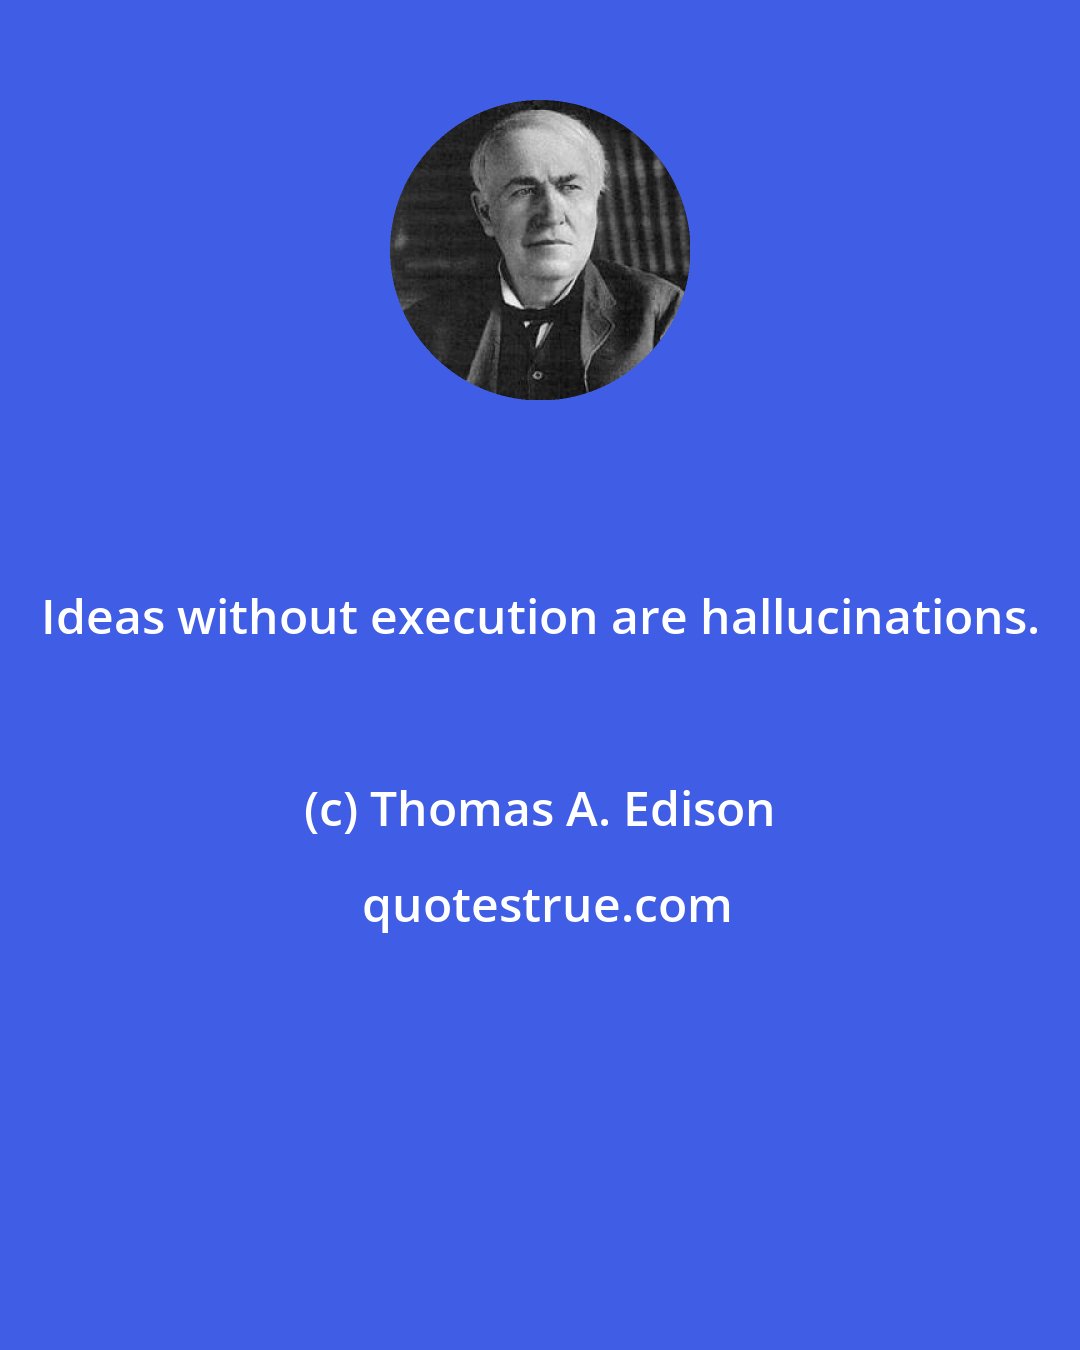 Thomas A. Edison: Ideas without execution are hallucinations.